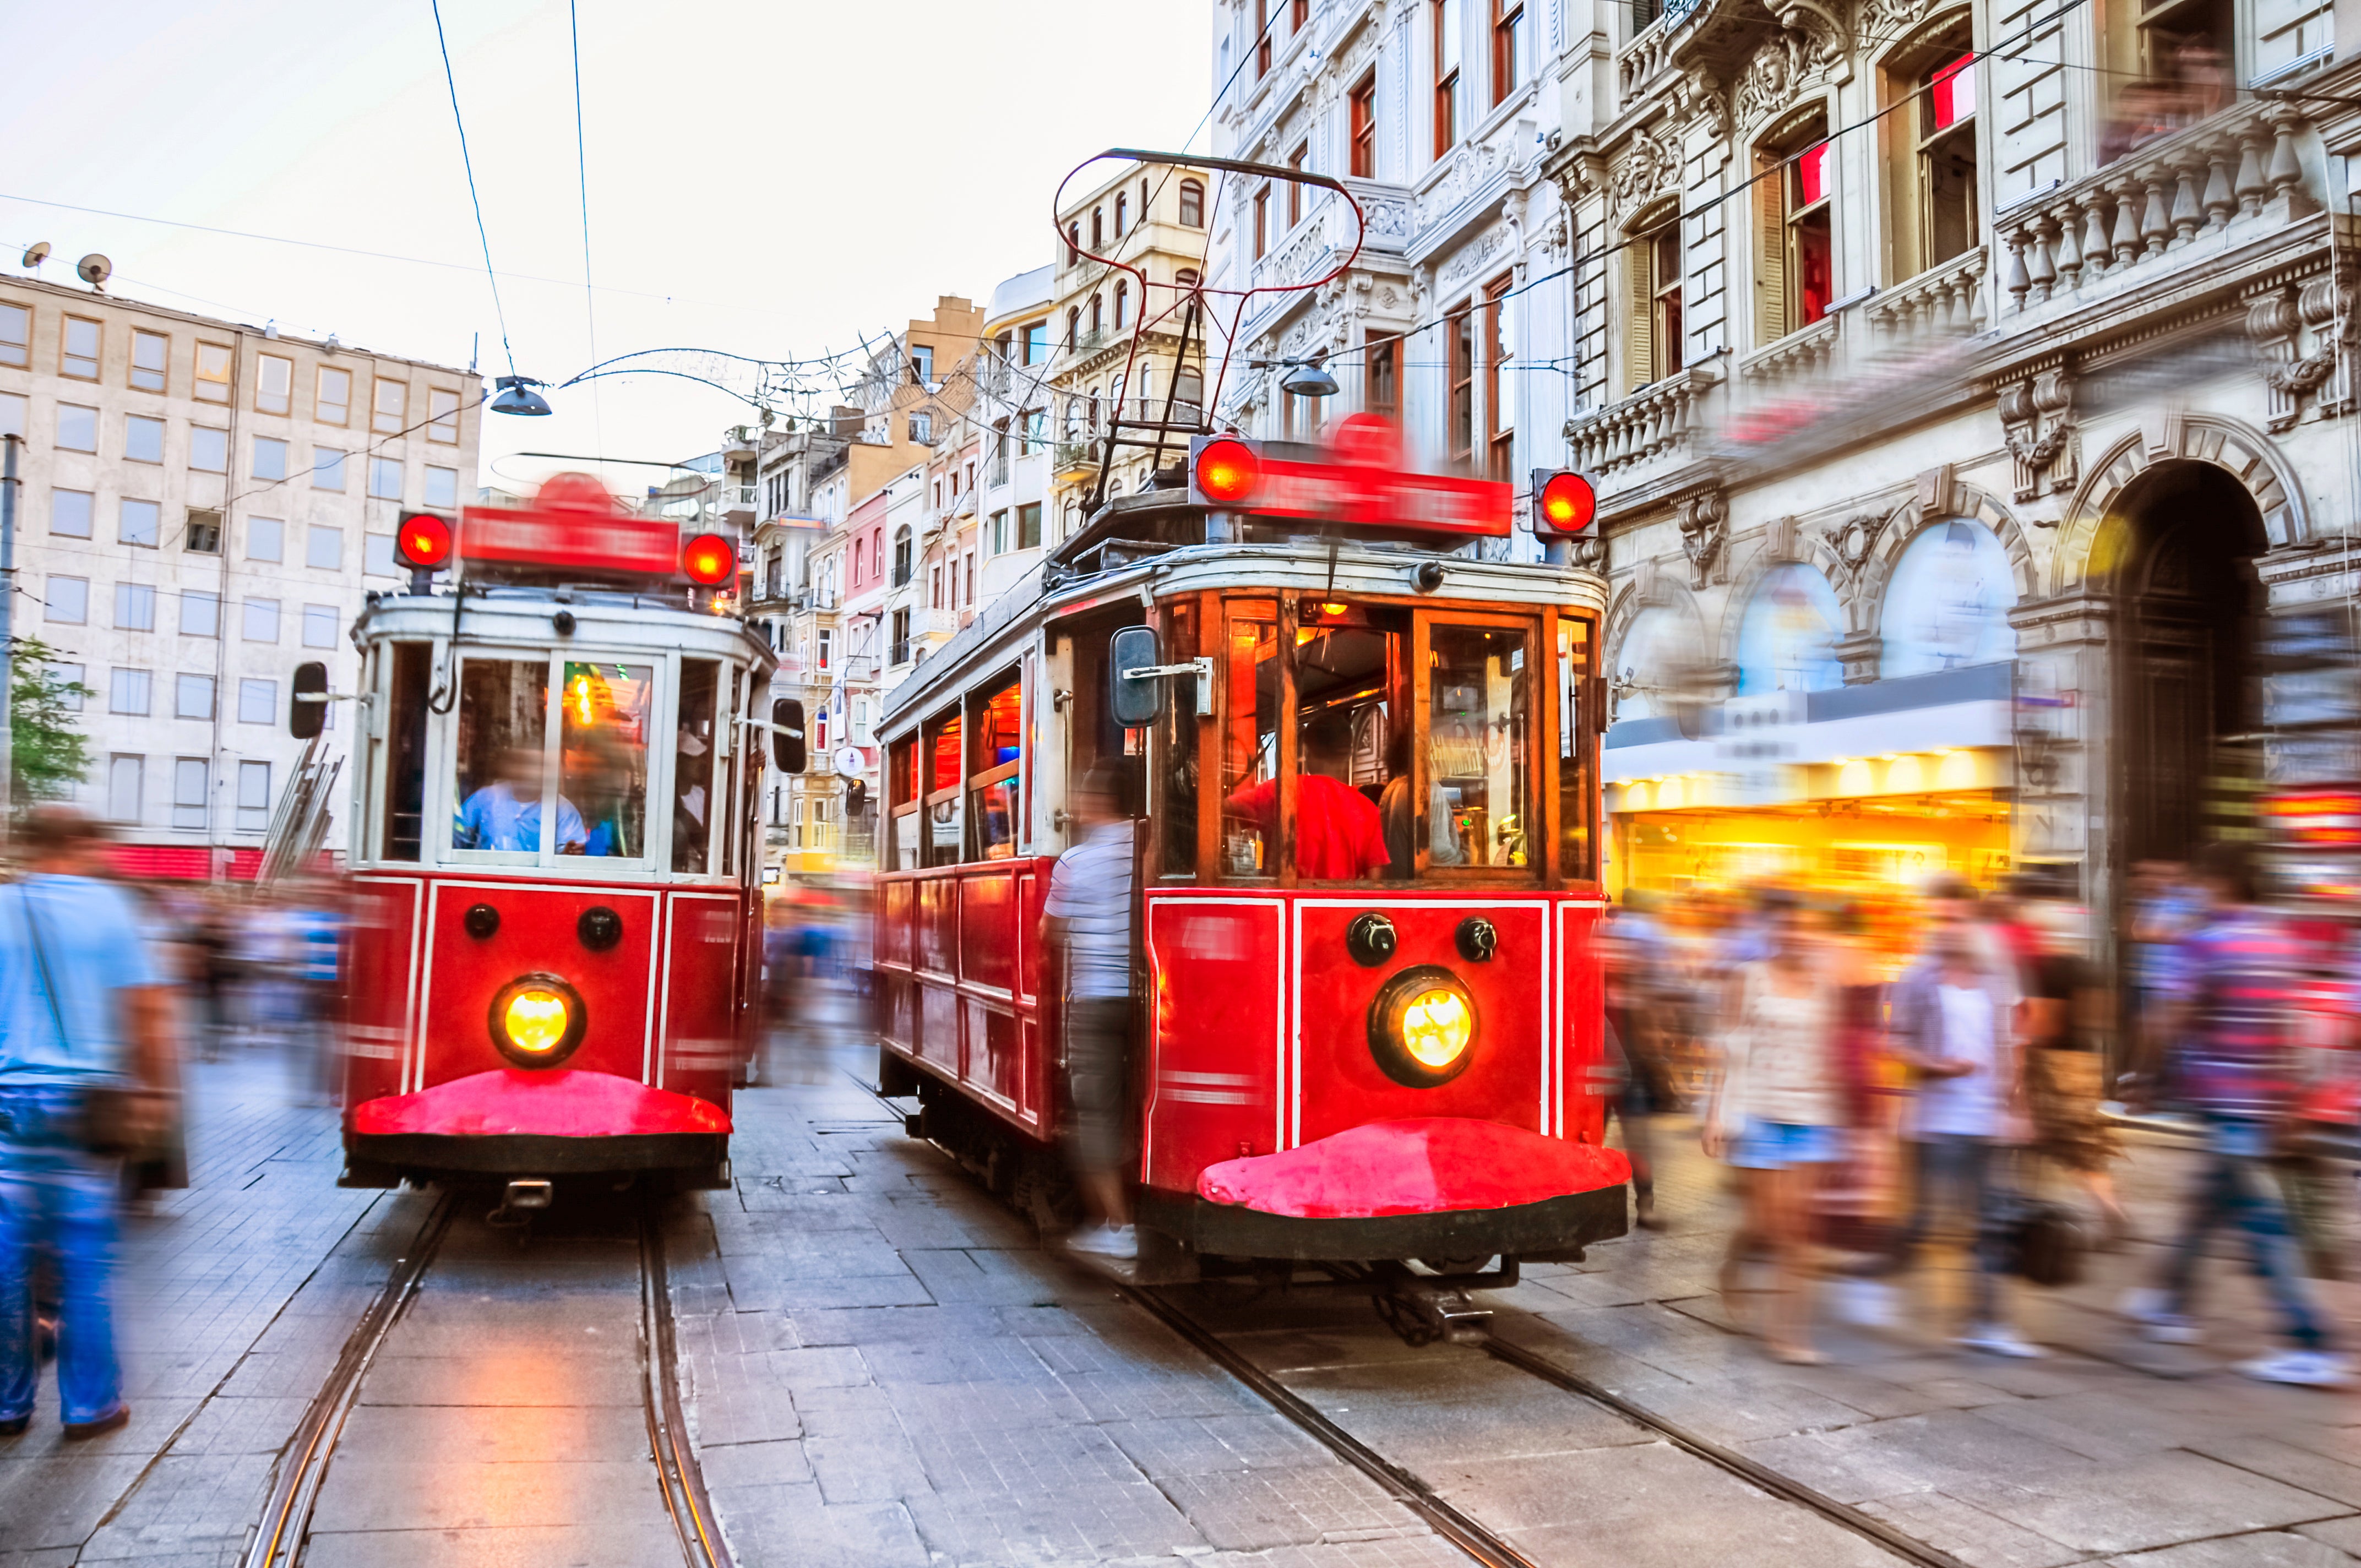 The charming tram system makes for eco-friendly tours around the city